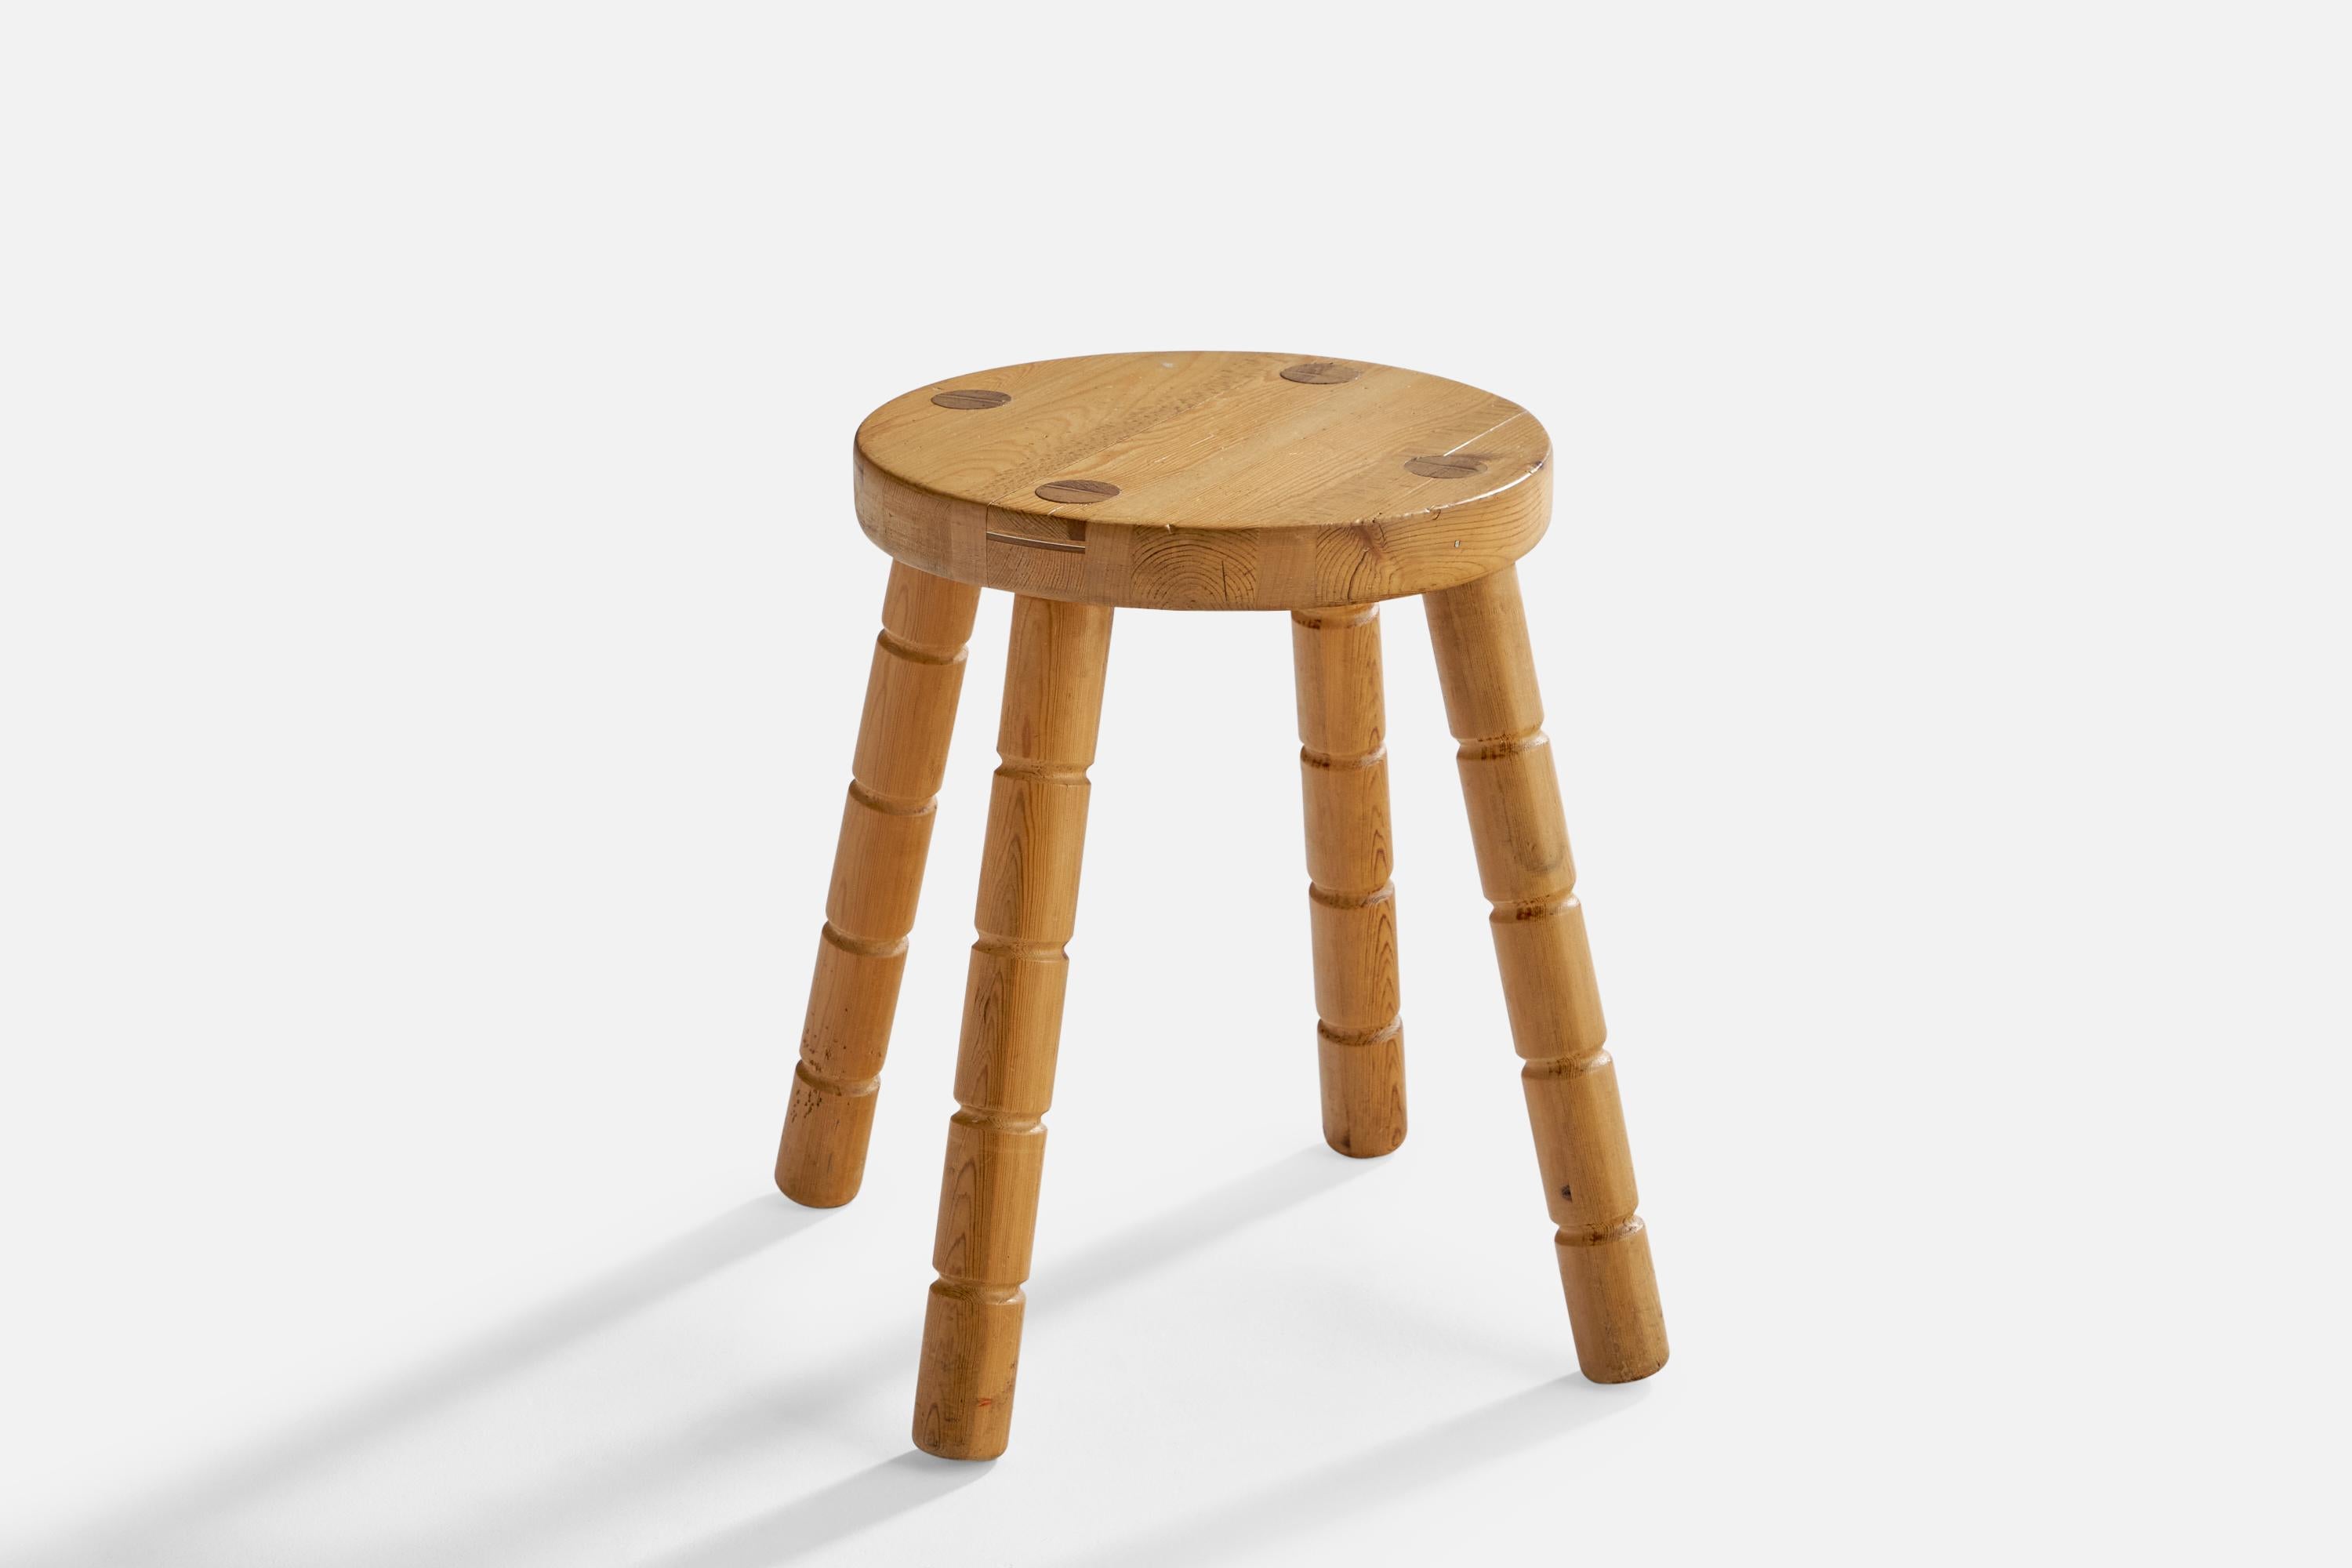 A pine stool designed and produced in Sweden, c. 1970s.

Seat height: 17.38”
 